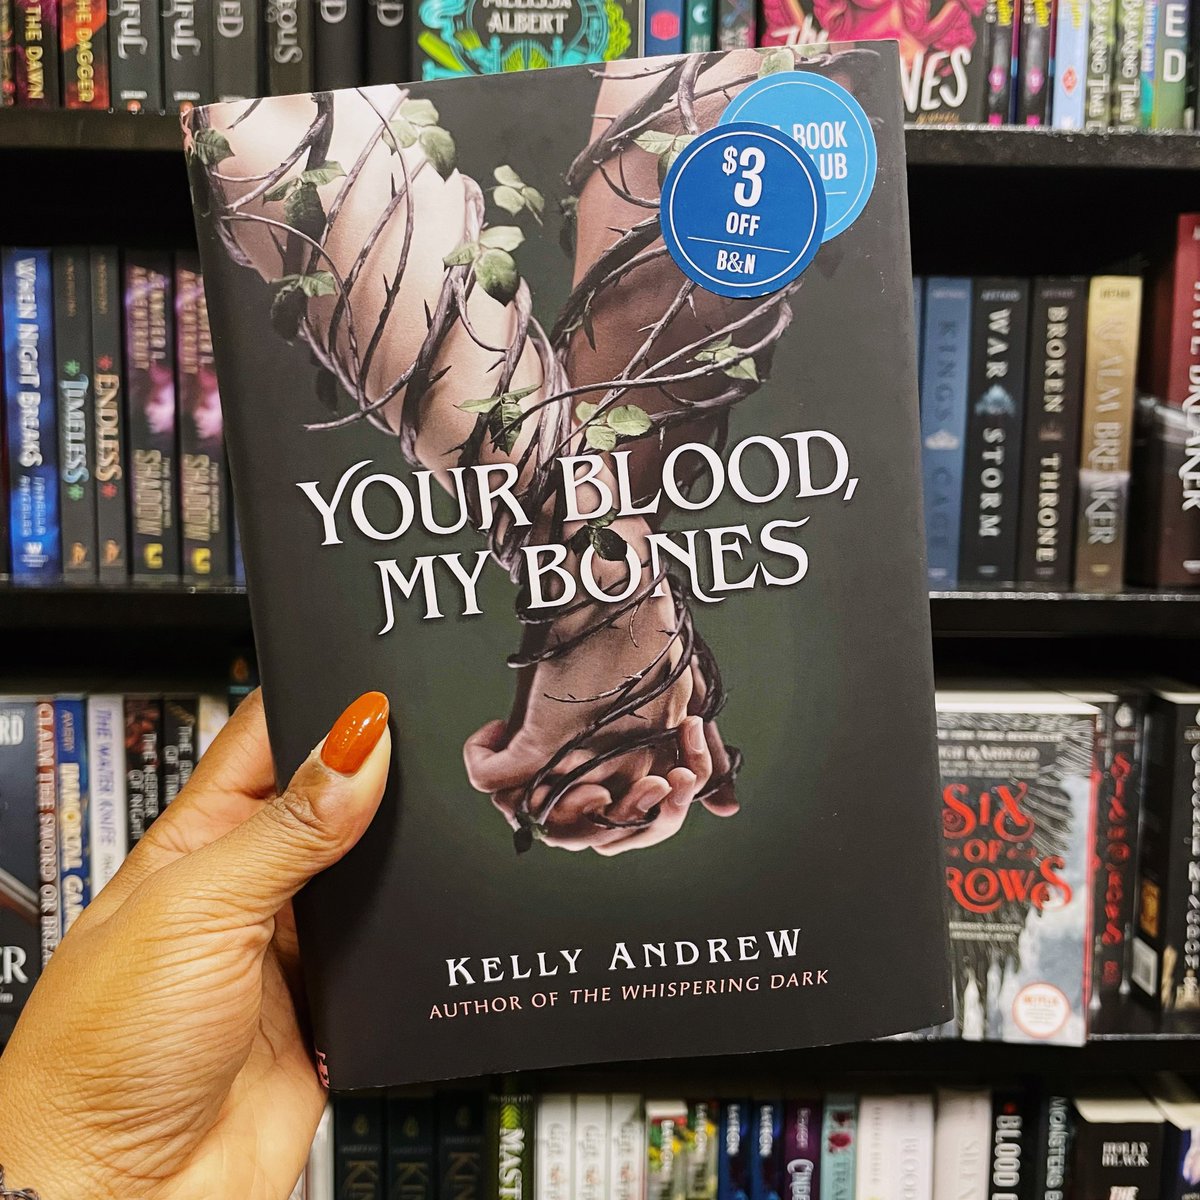 “She meant to burn it down. The house, with its pitched gables and chipped paint…”

#BNBuzz #BNTheKnow #iloveit #bnbirkdale #BNMagic #BNBookFun #yeahTHATbn #ourbn #BNYABookclub